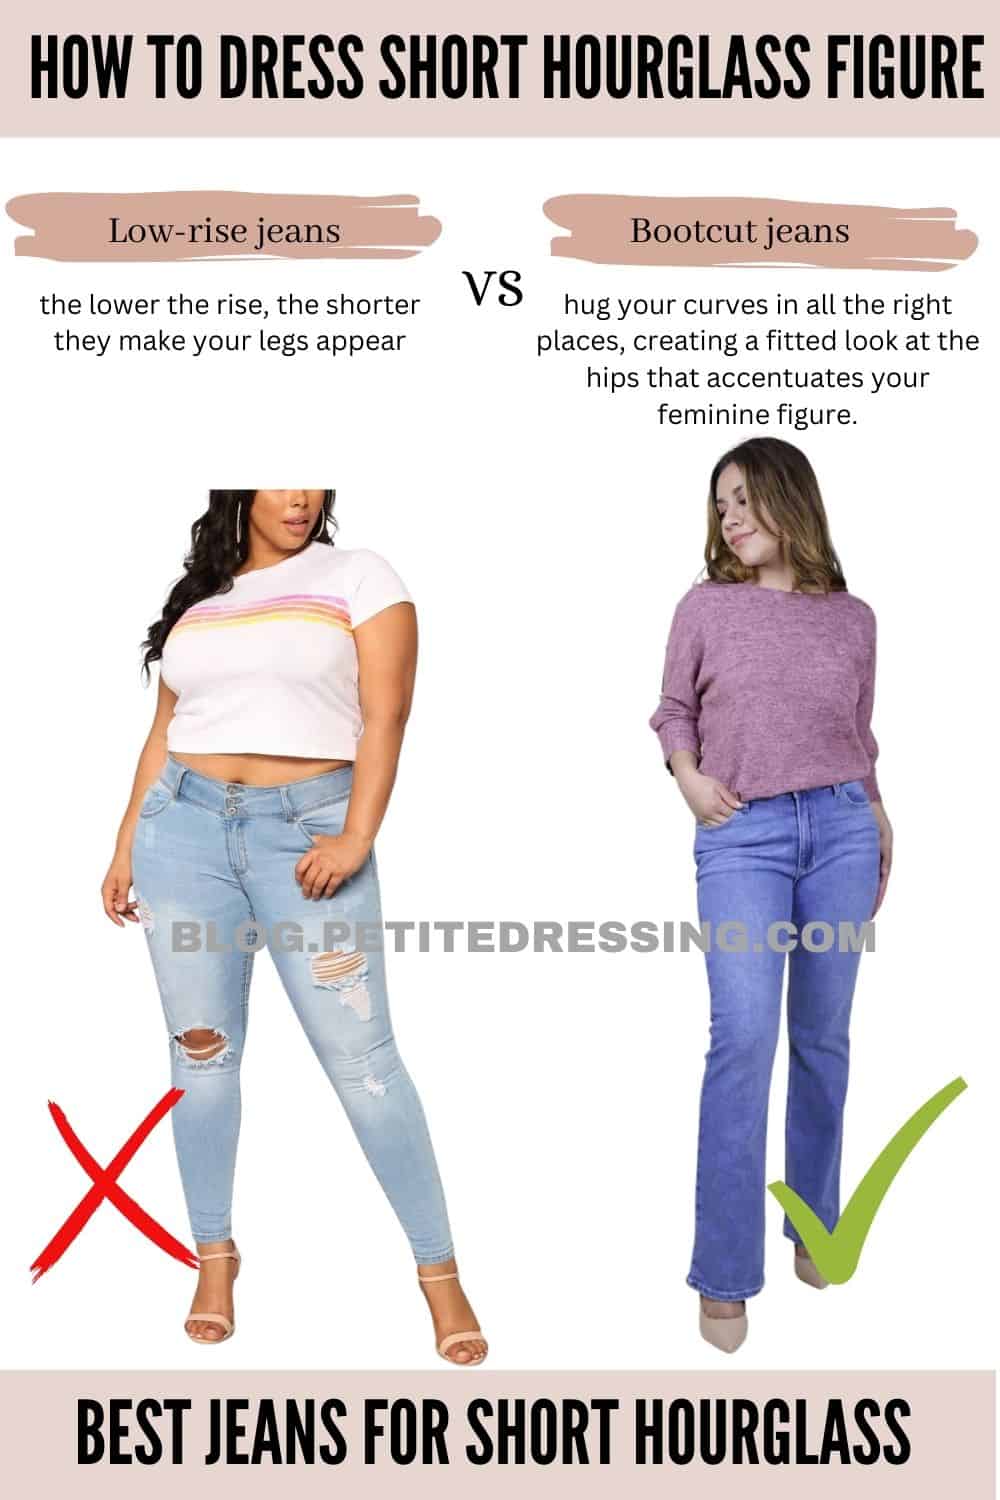 Comprehensive Style Guide for Short Hourglass Figure